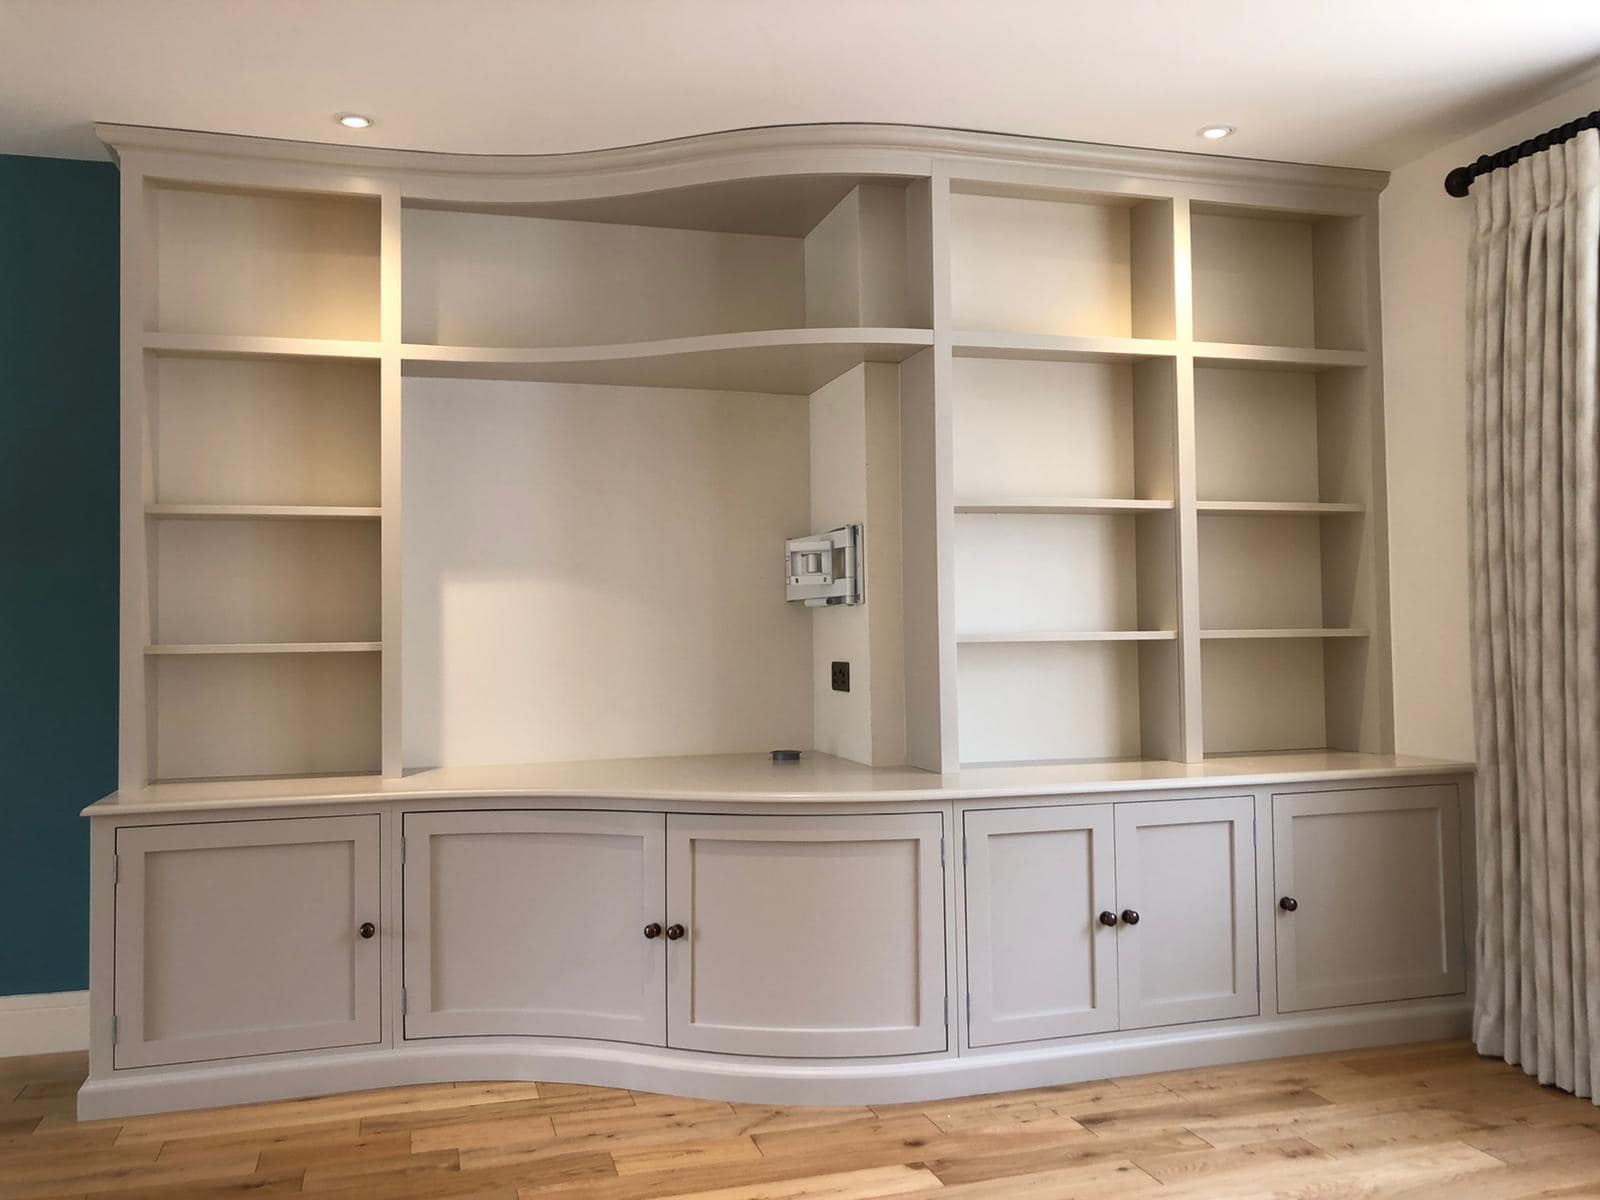 A curved book case and TV unit in a well lit room